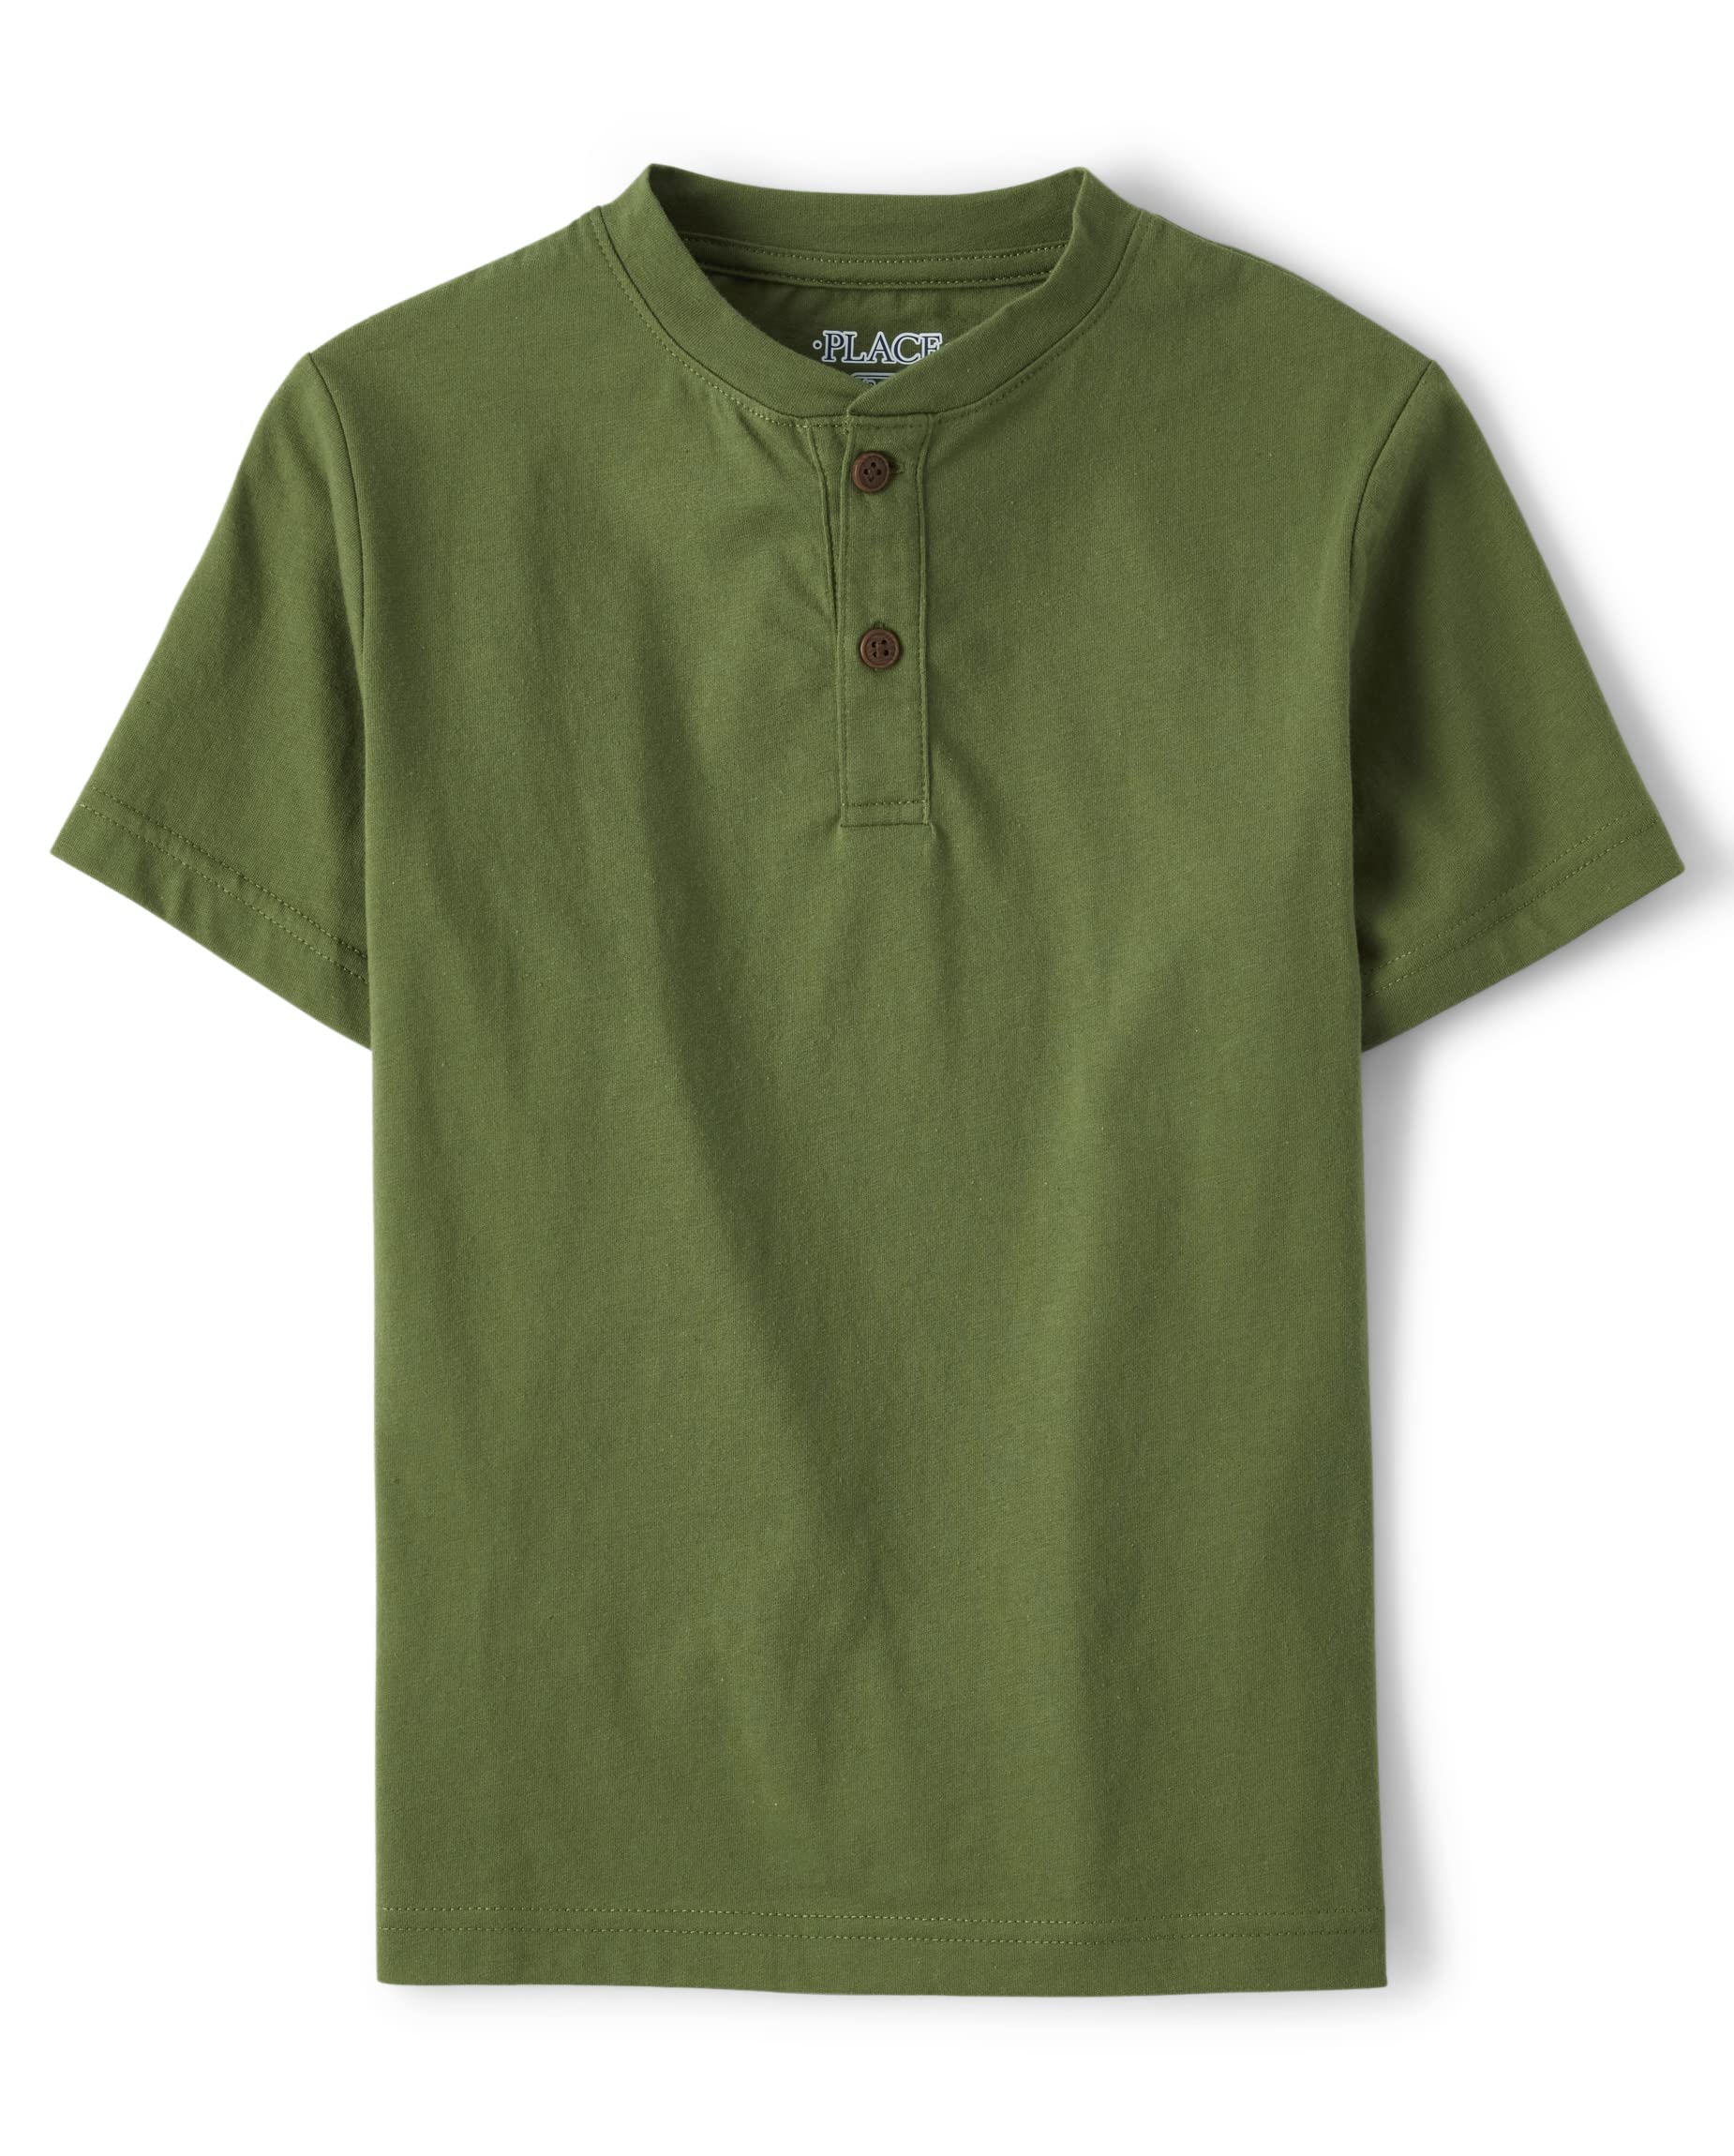 The Children's Place Boys' Short Sleeve Henly T-Shirt